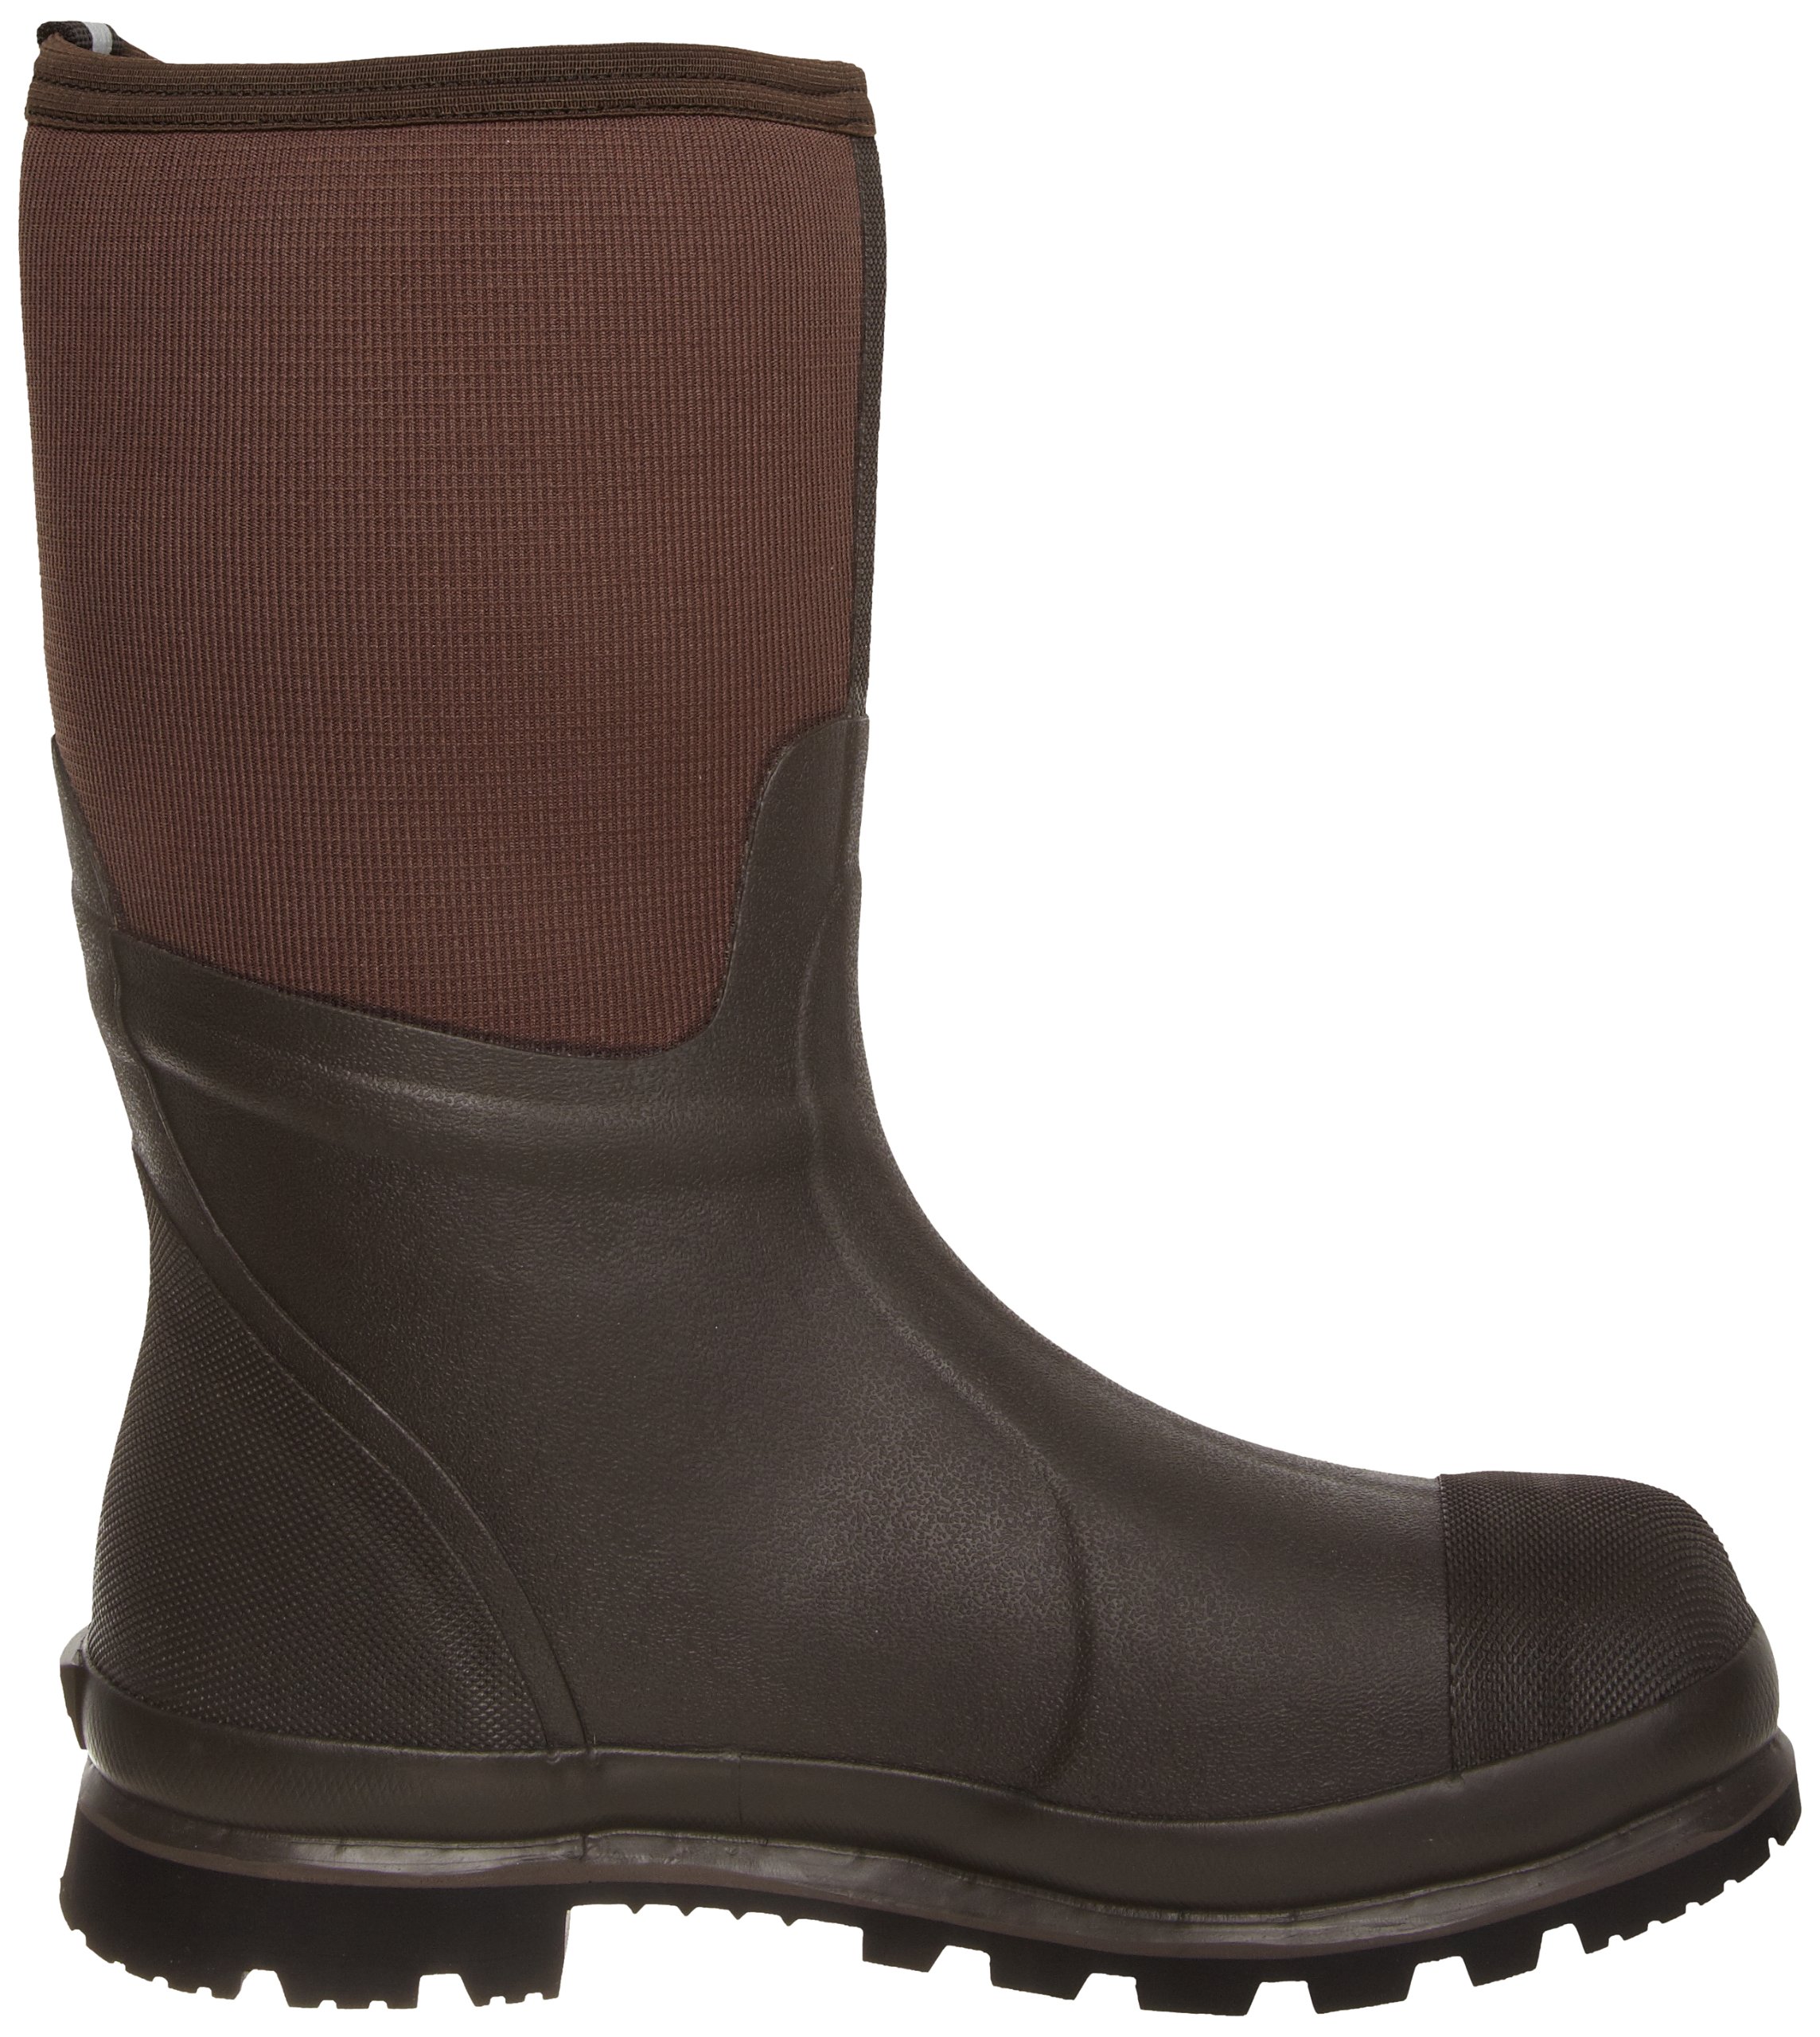 Muck Boot womens Chore Cool Mid-u industrial and construction boots, Brown, 11 Women 10 Men US